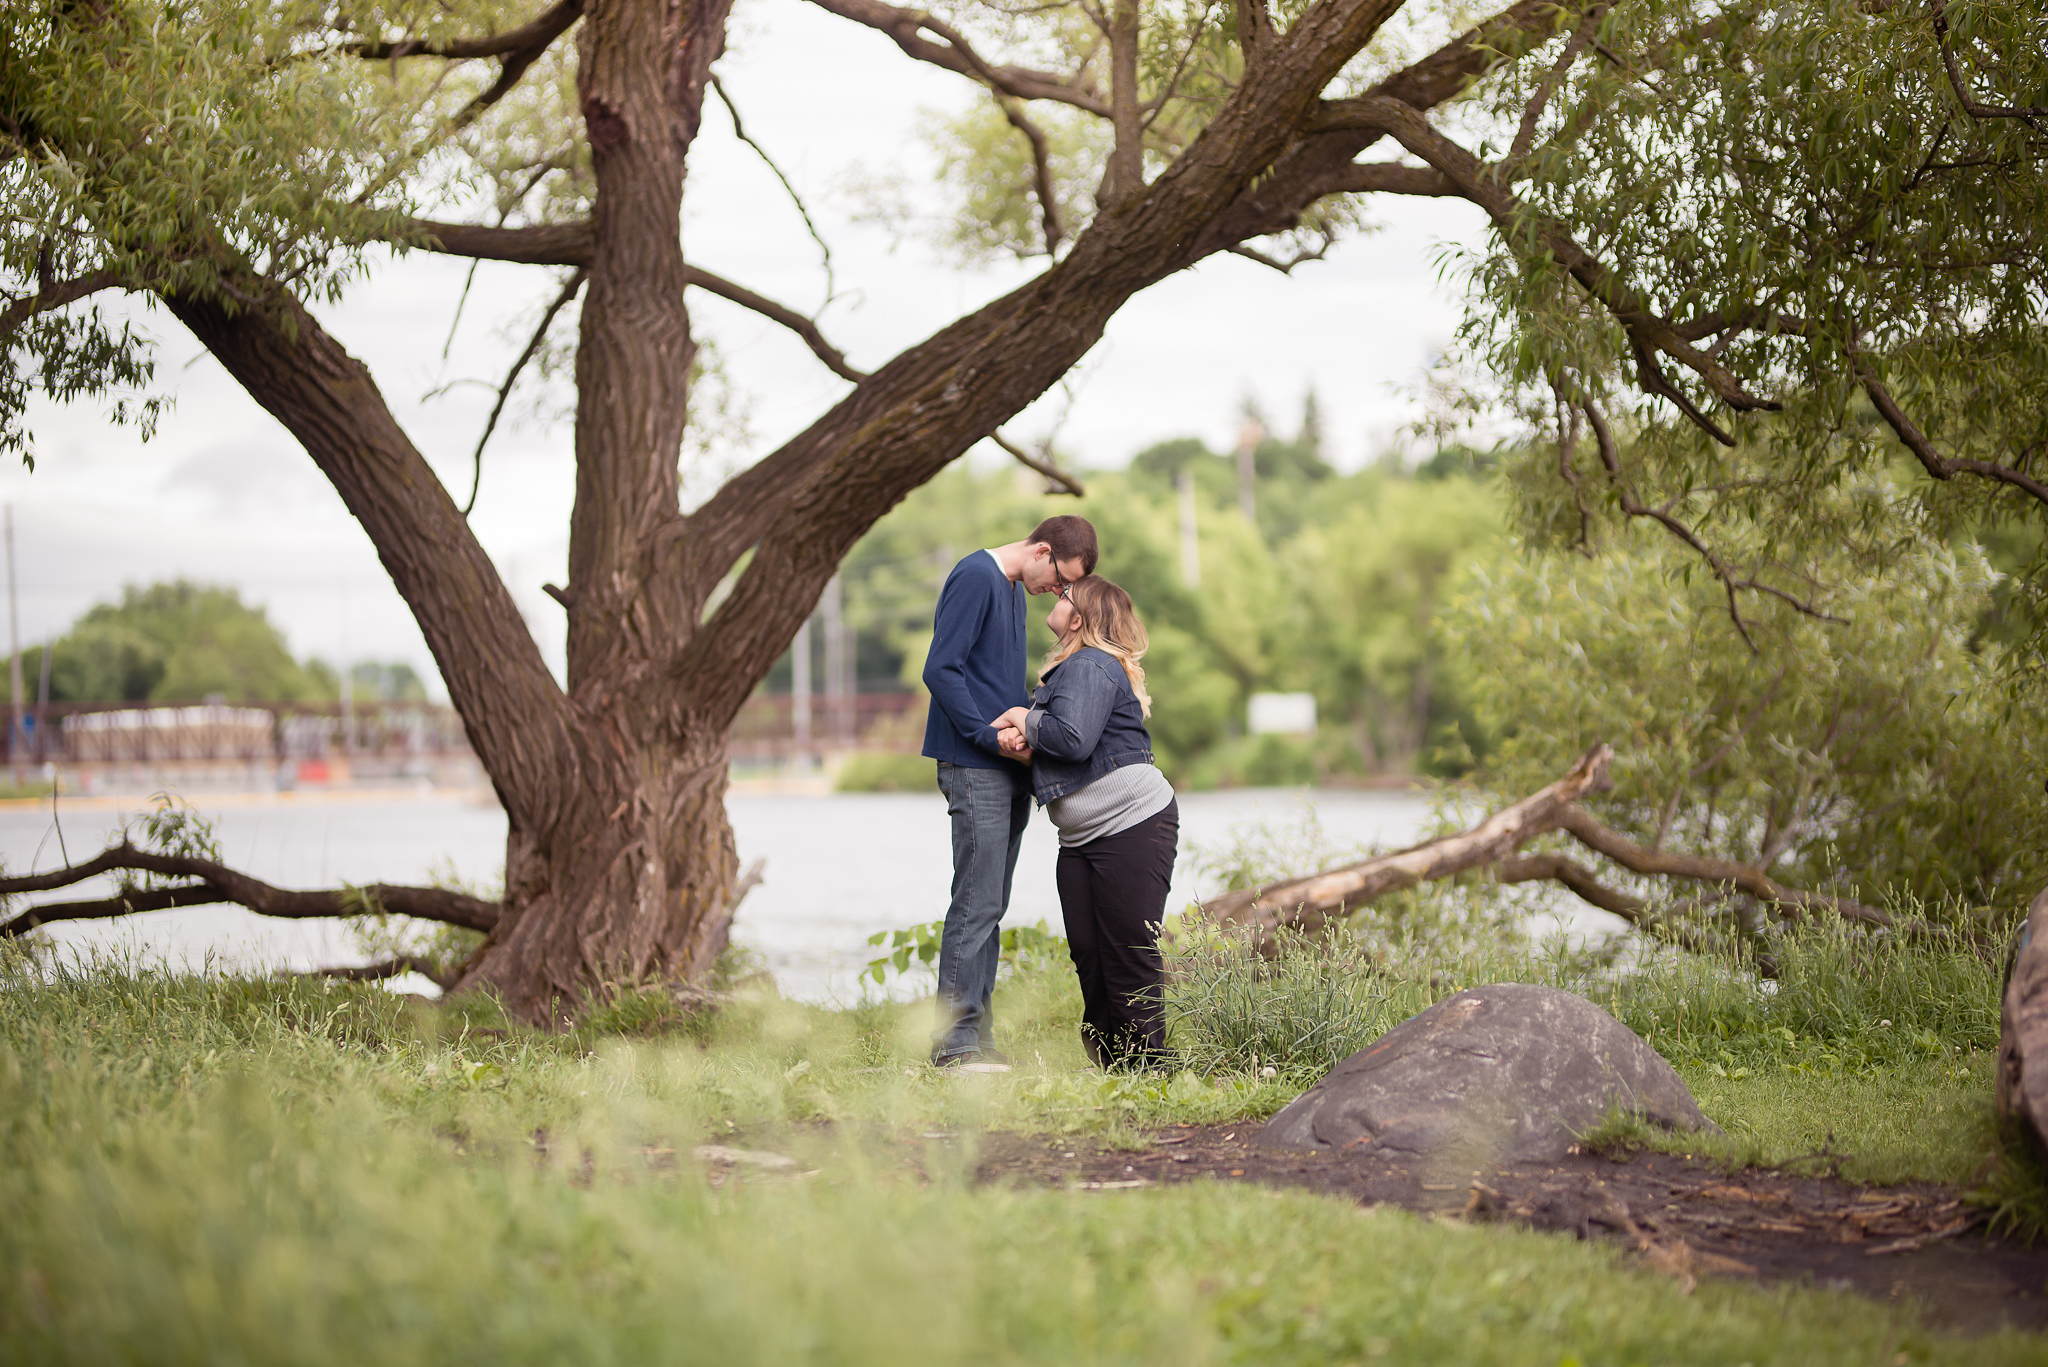 Couples483NaomiLuciennePhotography062018-Edit.jpg